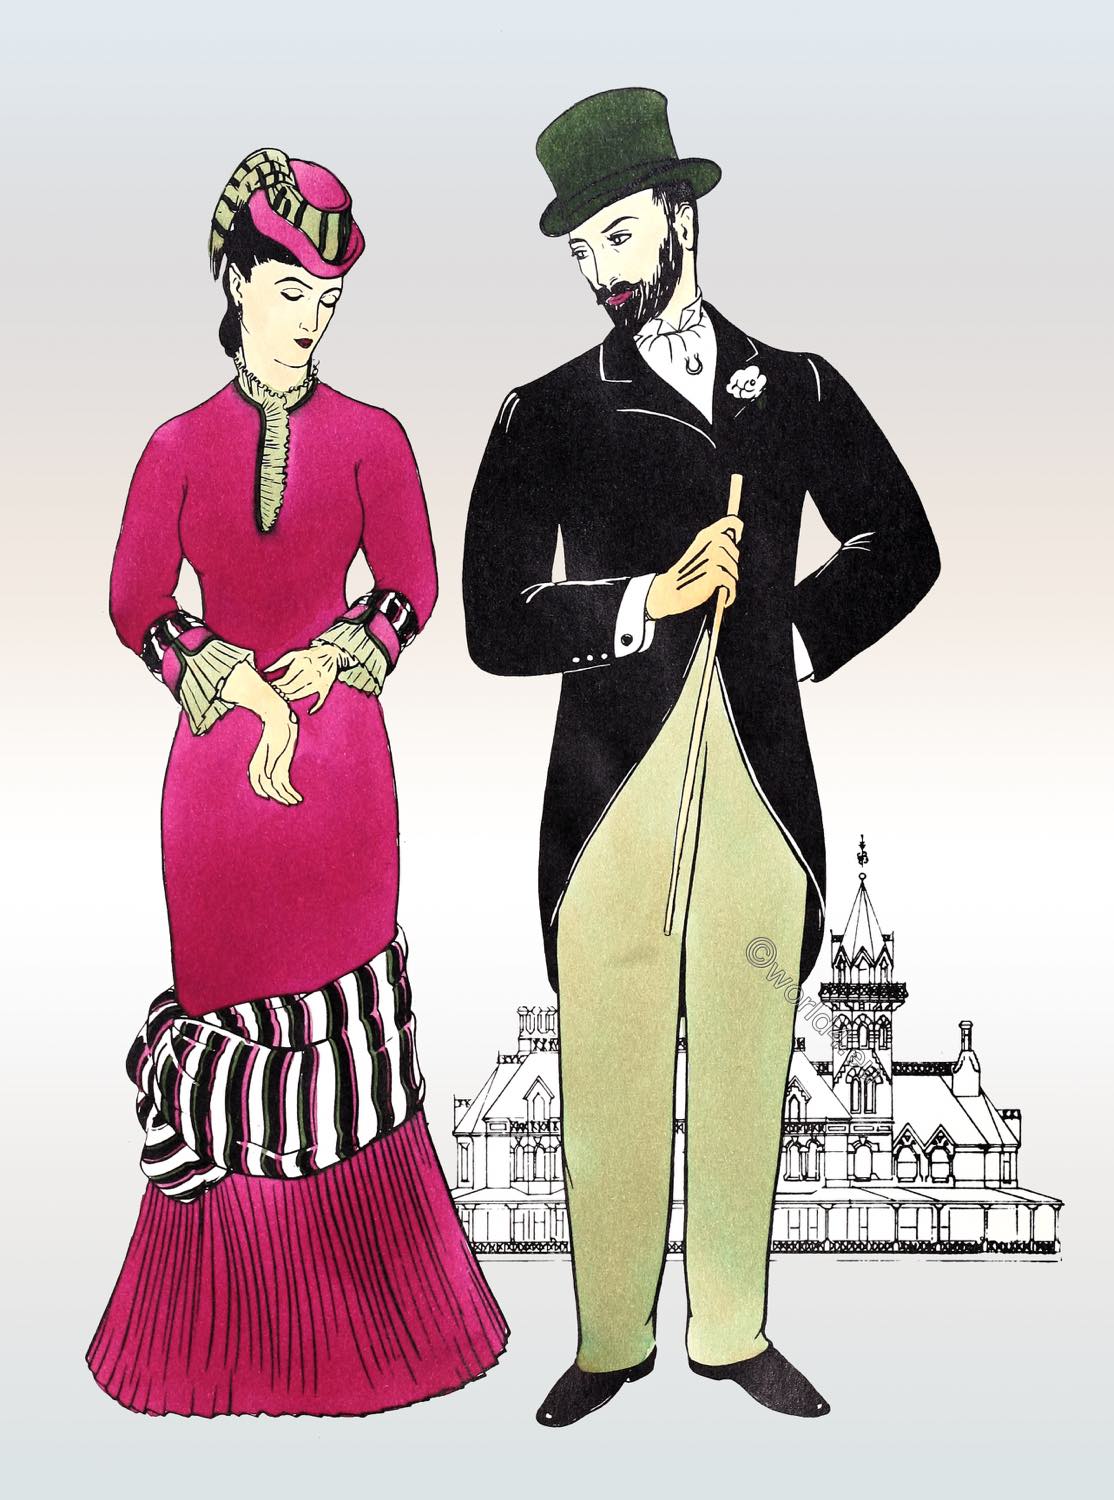 England 1880's men's and milady's fashion. Late Victorian costumes.